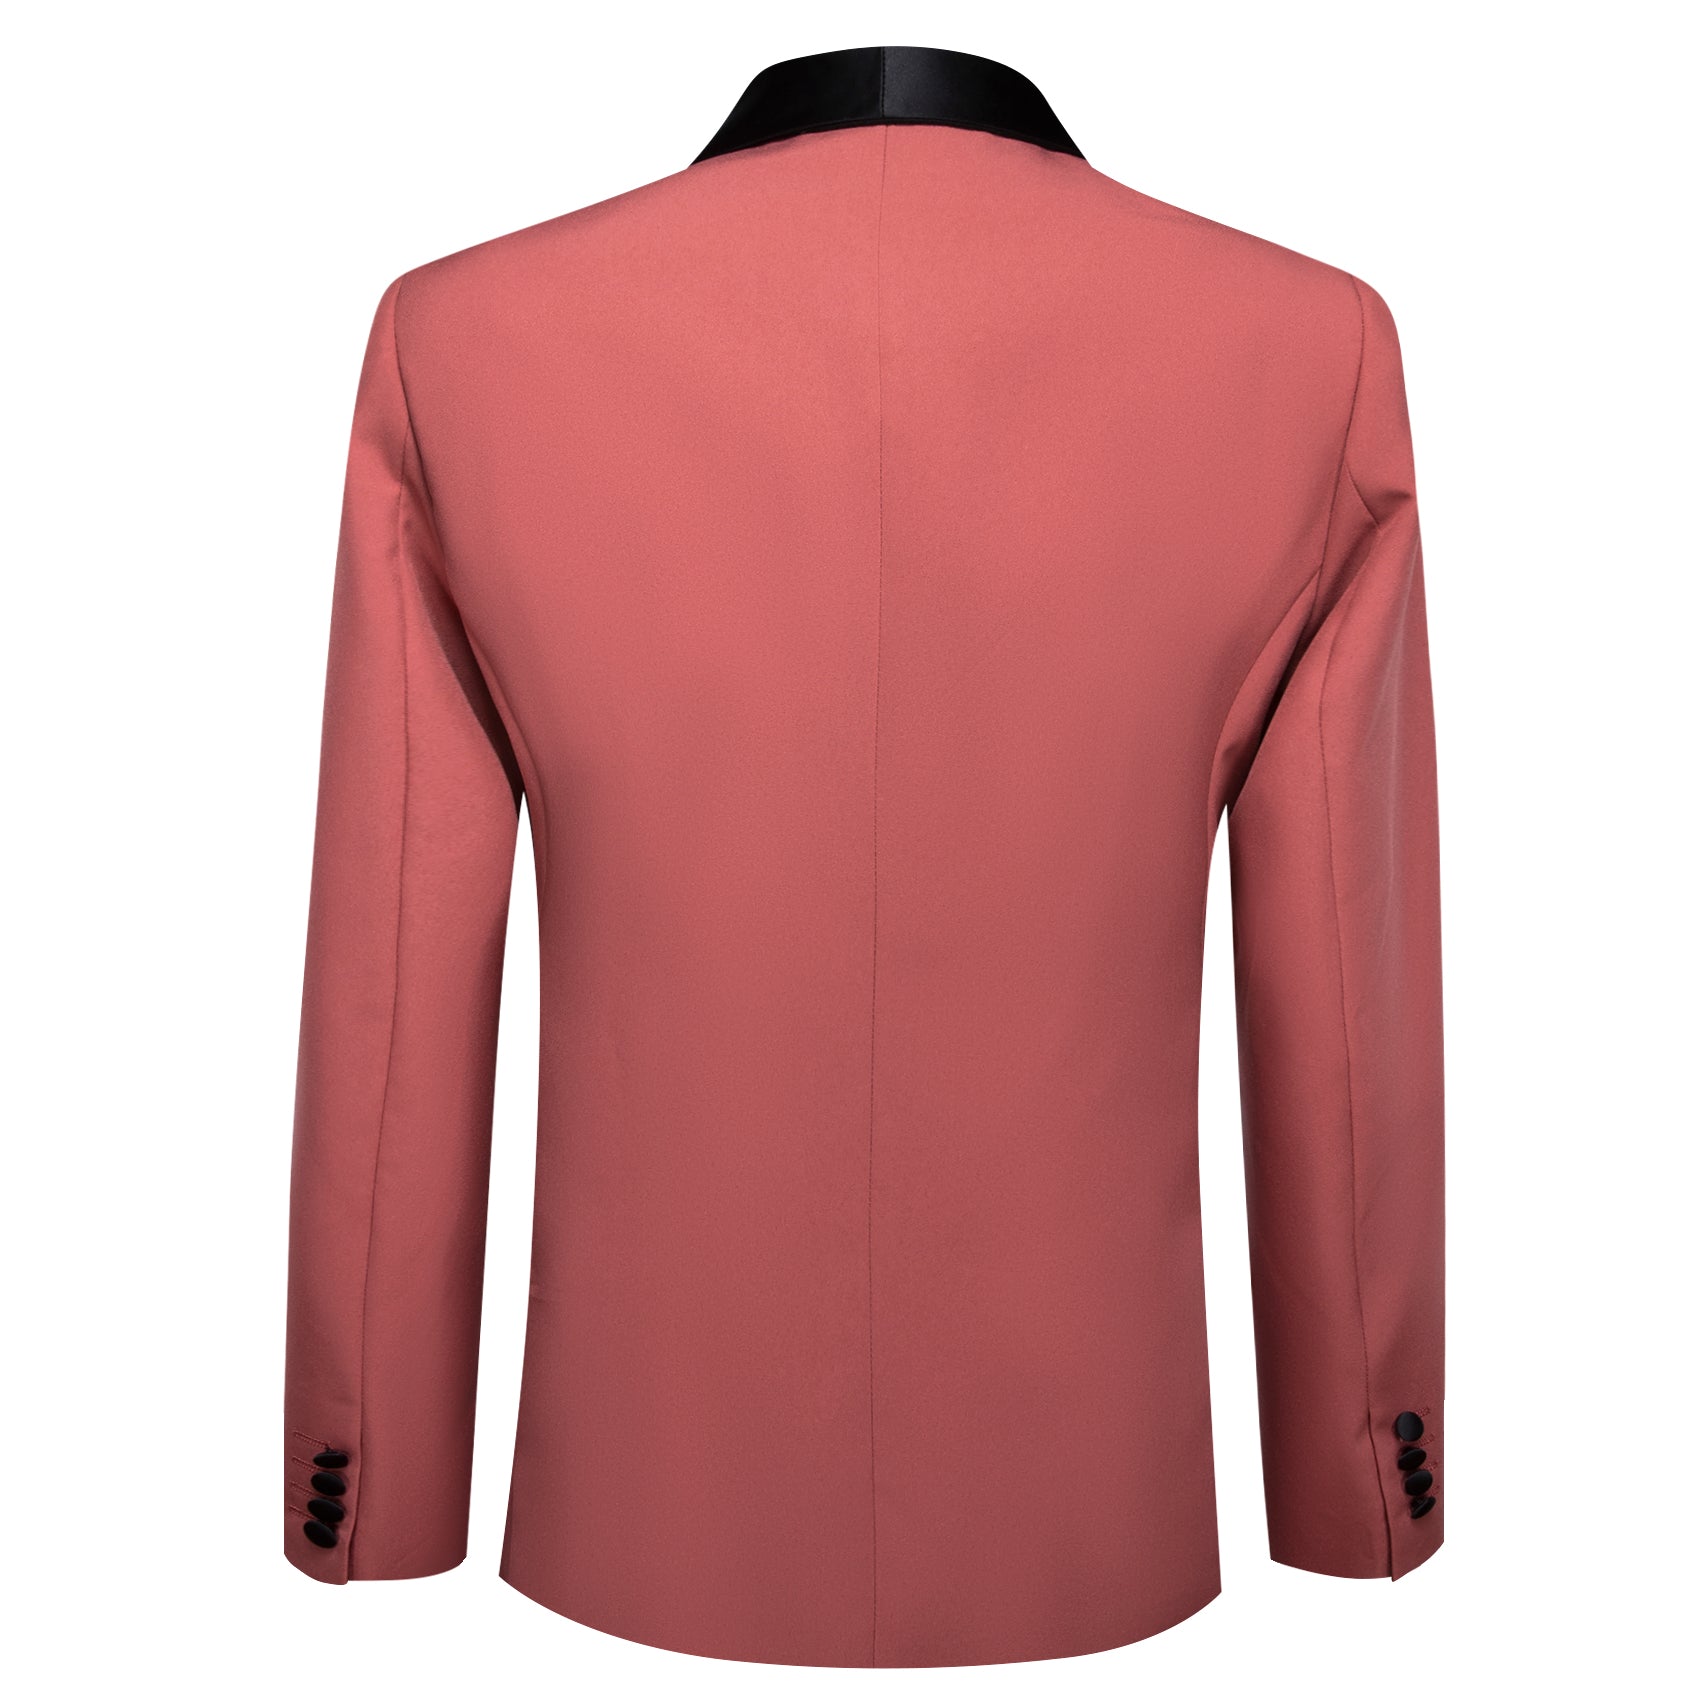 Barry.wang Men's Suit Light Coral Solid Shawl Collar Suit Jacket